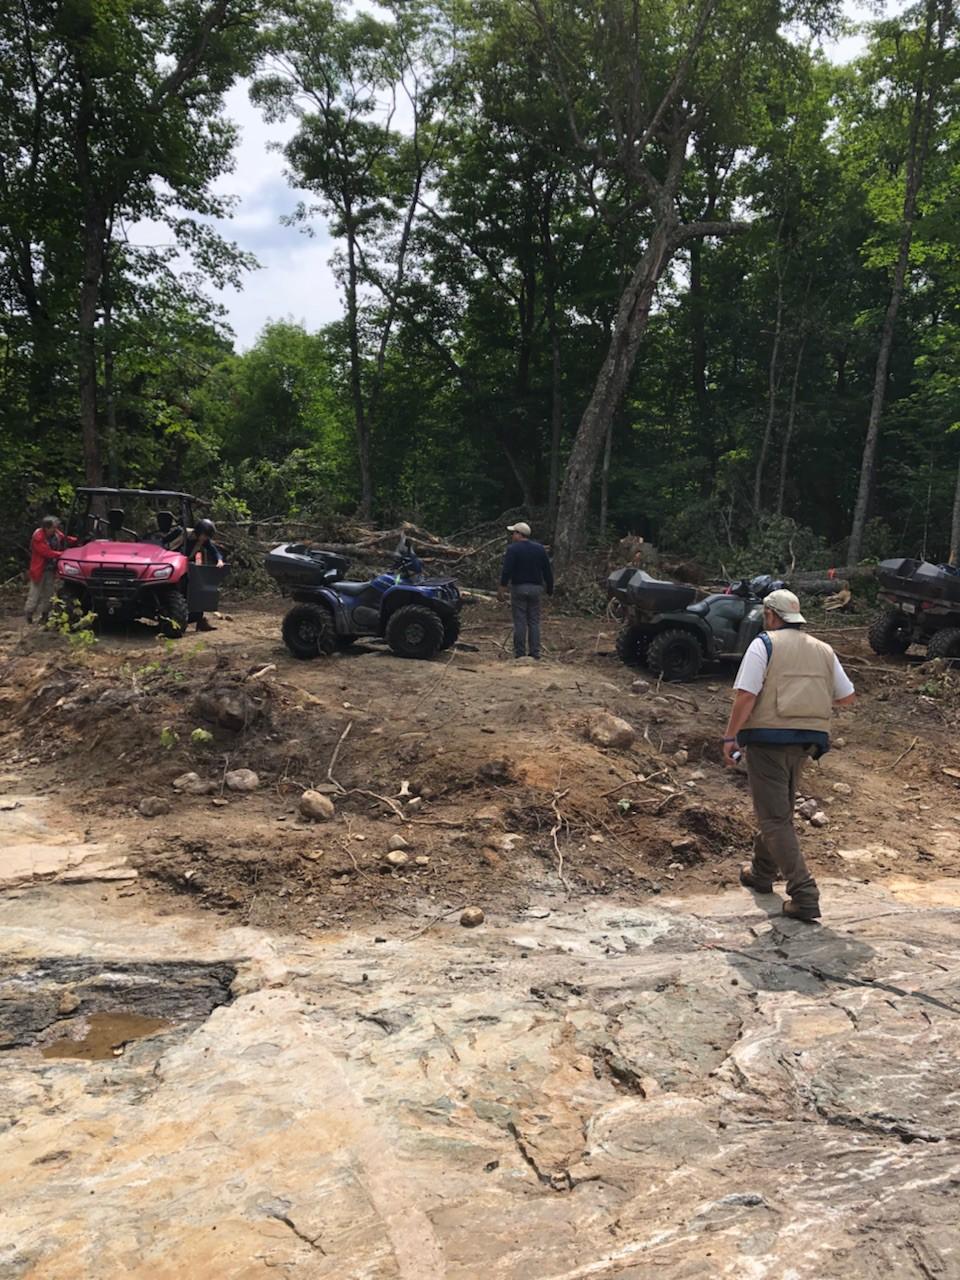 For this showing we all rode on ATV's out to the area that had been recently trenched. Talk about fun!